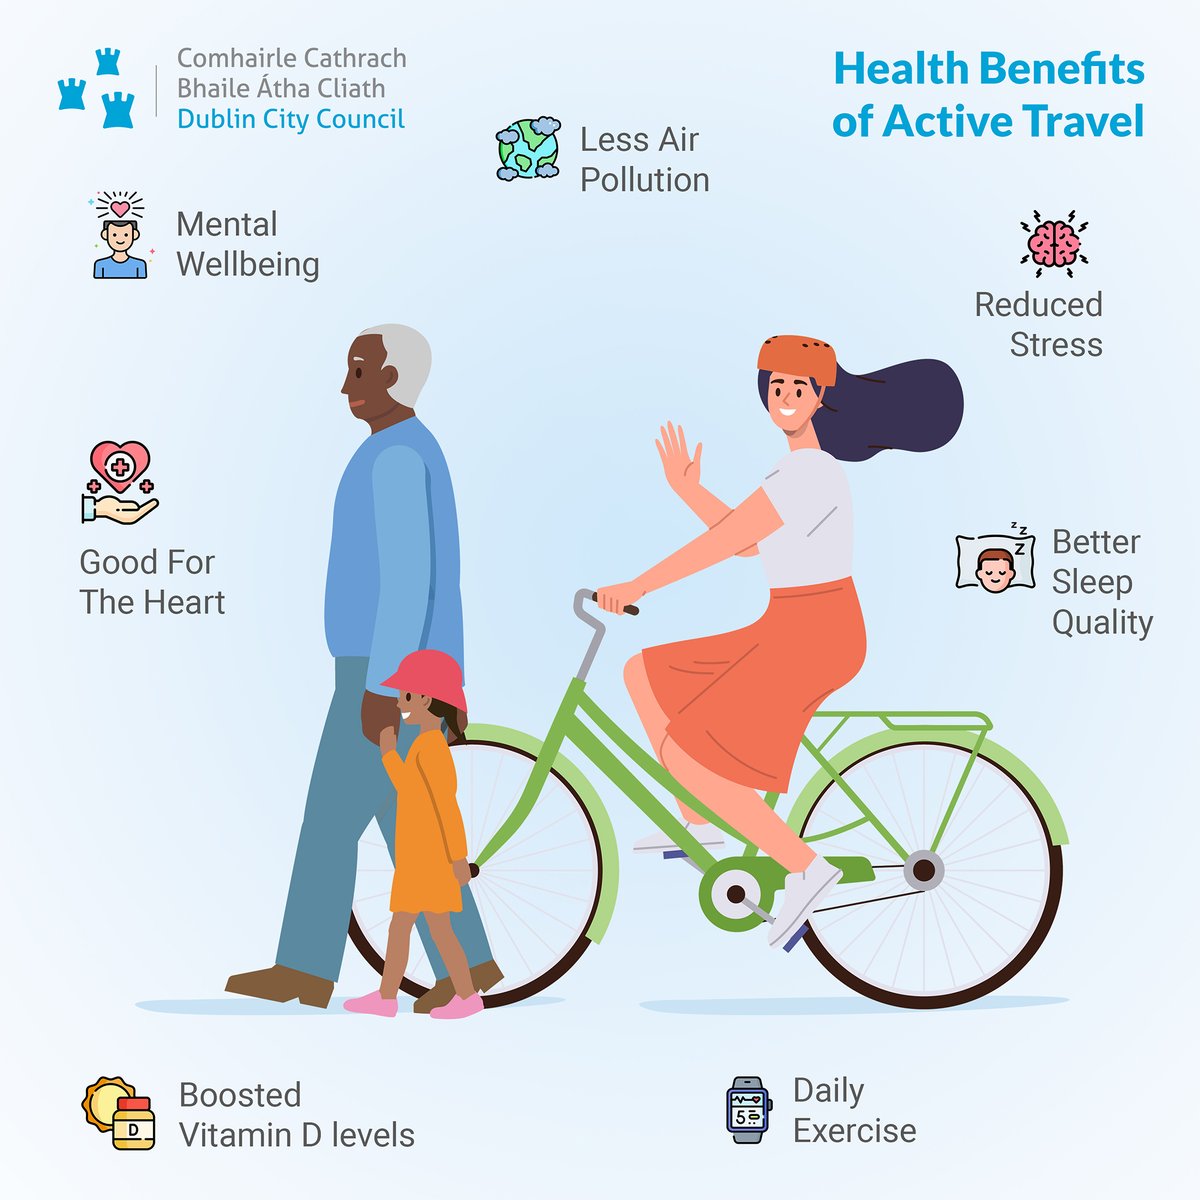 Active Travel helps promote healthy physical wellbeing showing that walking or cycling for 30 minutes a day can help decrease type 2 diabetes by 30% and cardiovascular disease by 10%. #ActiveTravelNetwork #Healthbenefits